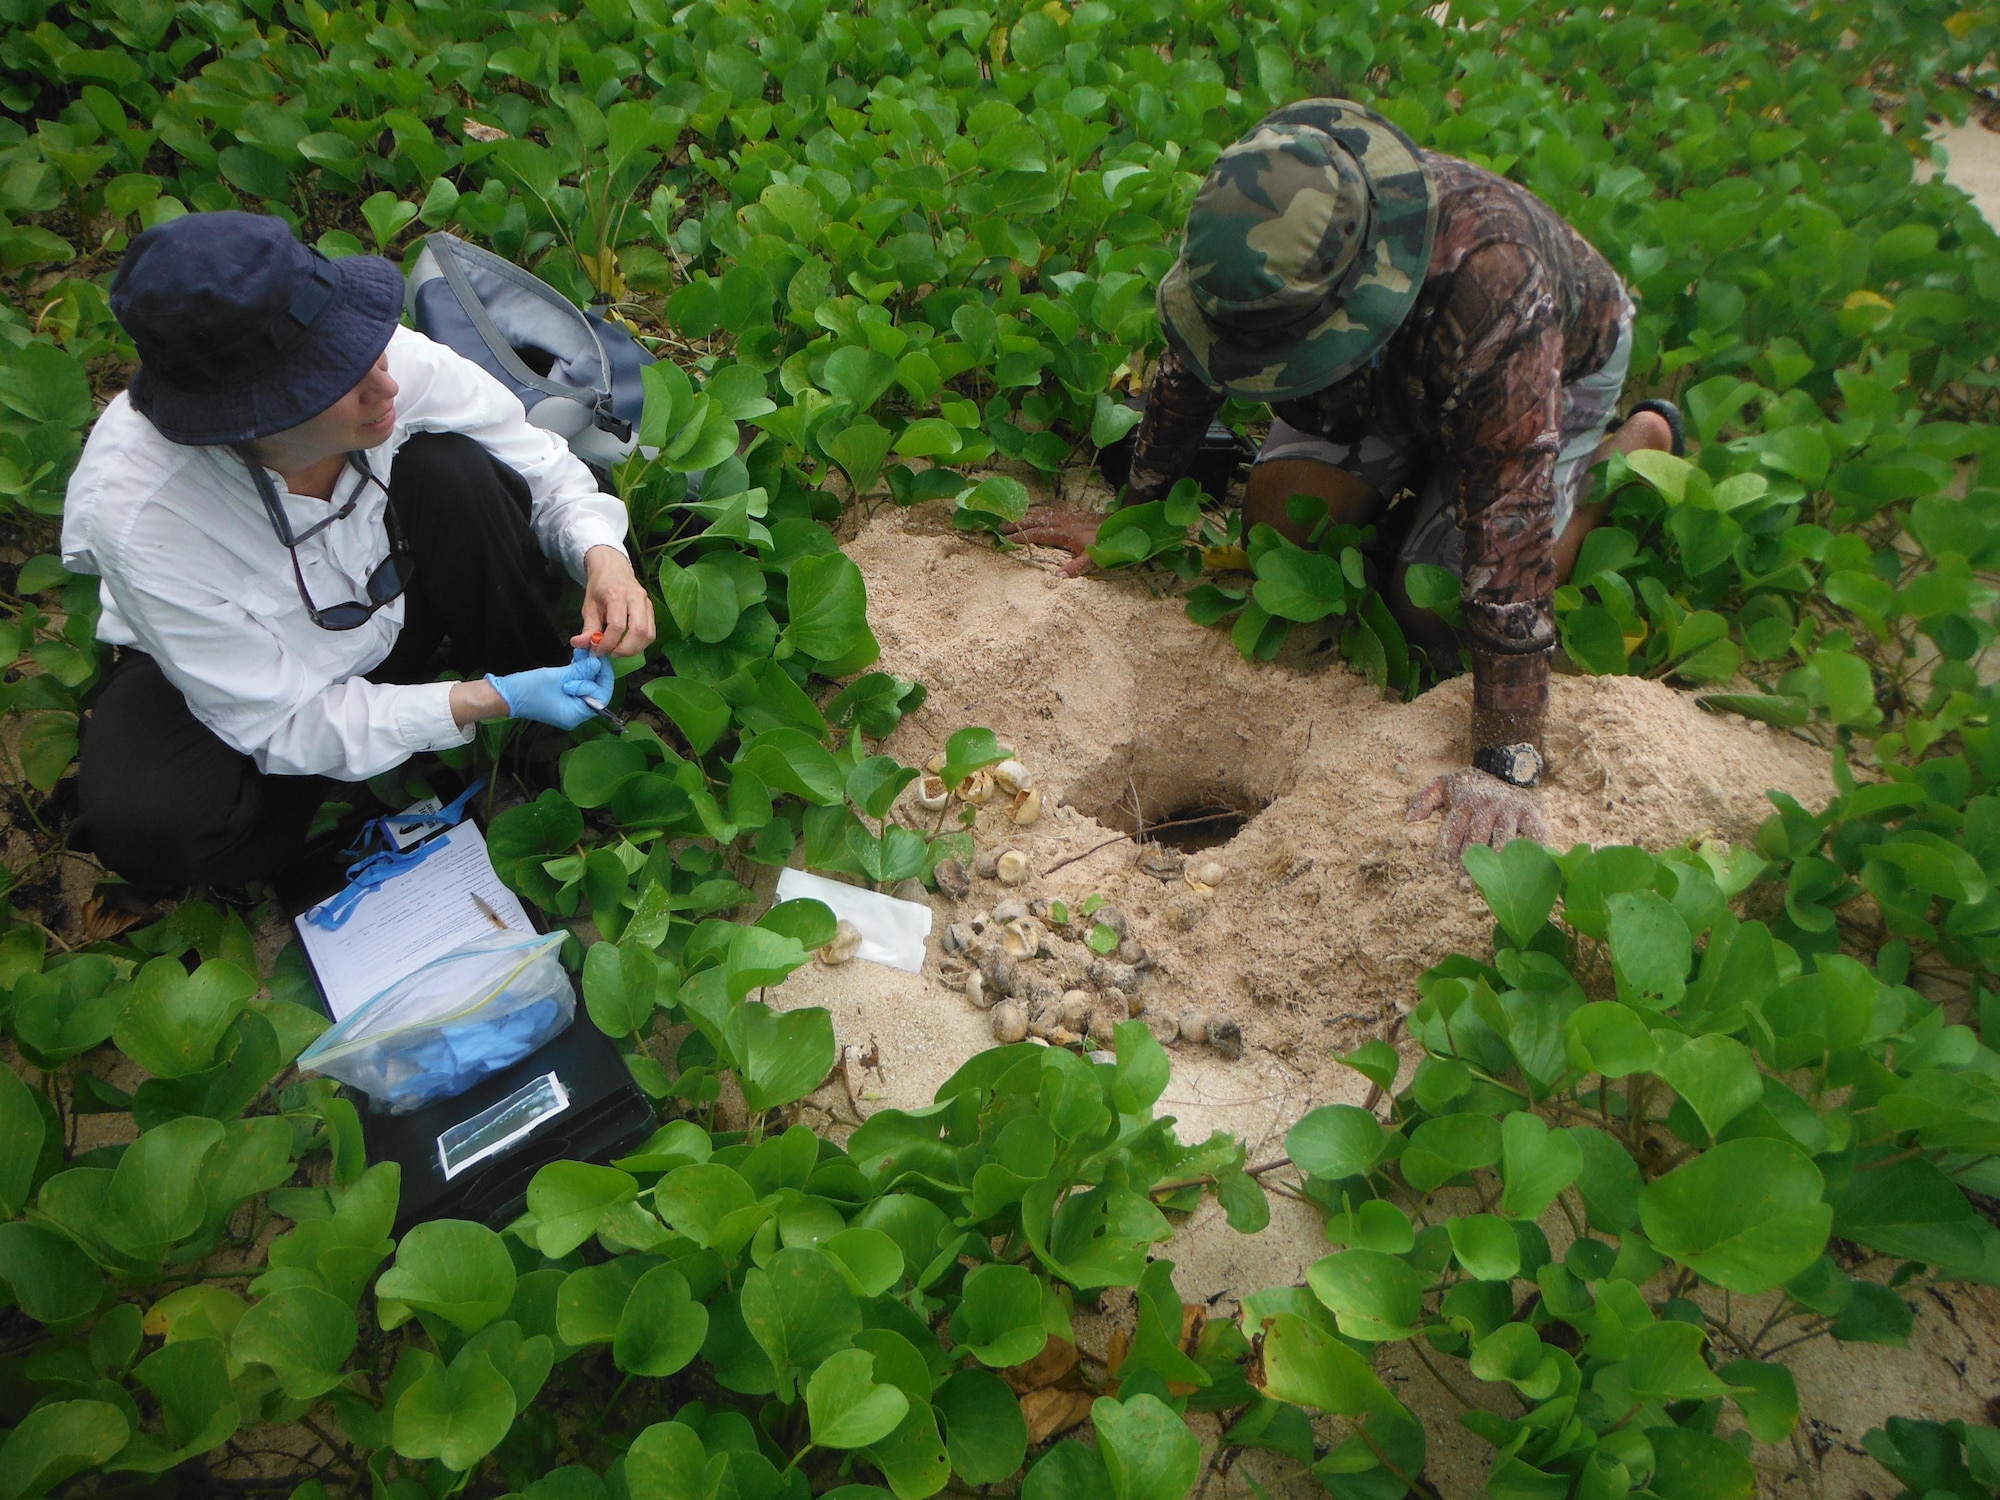 Marine biologists examine a hatched Green Turtle nest at Chulu Beach on the Island of Tinian, Sept. 18, 2016. The endangered Green Turtle egg nest was expected to hatch around the time the 31st Marine Expeditionary Unit was scheduled to conduct a boat raid to Chulu beach as part of Exercise Valiant Shield. Valiant Shield is a biennial U.S. Air Force, Navy and Marine Corps exercise held in Guam, focusing on real-world proficiency in sustaining joint forces at sea, in the air, on land and in cyberspace. (U.S. Marine Corps photo by Lance Cpl. Kelsey Dornfeld)